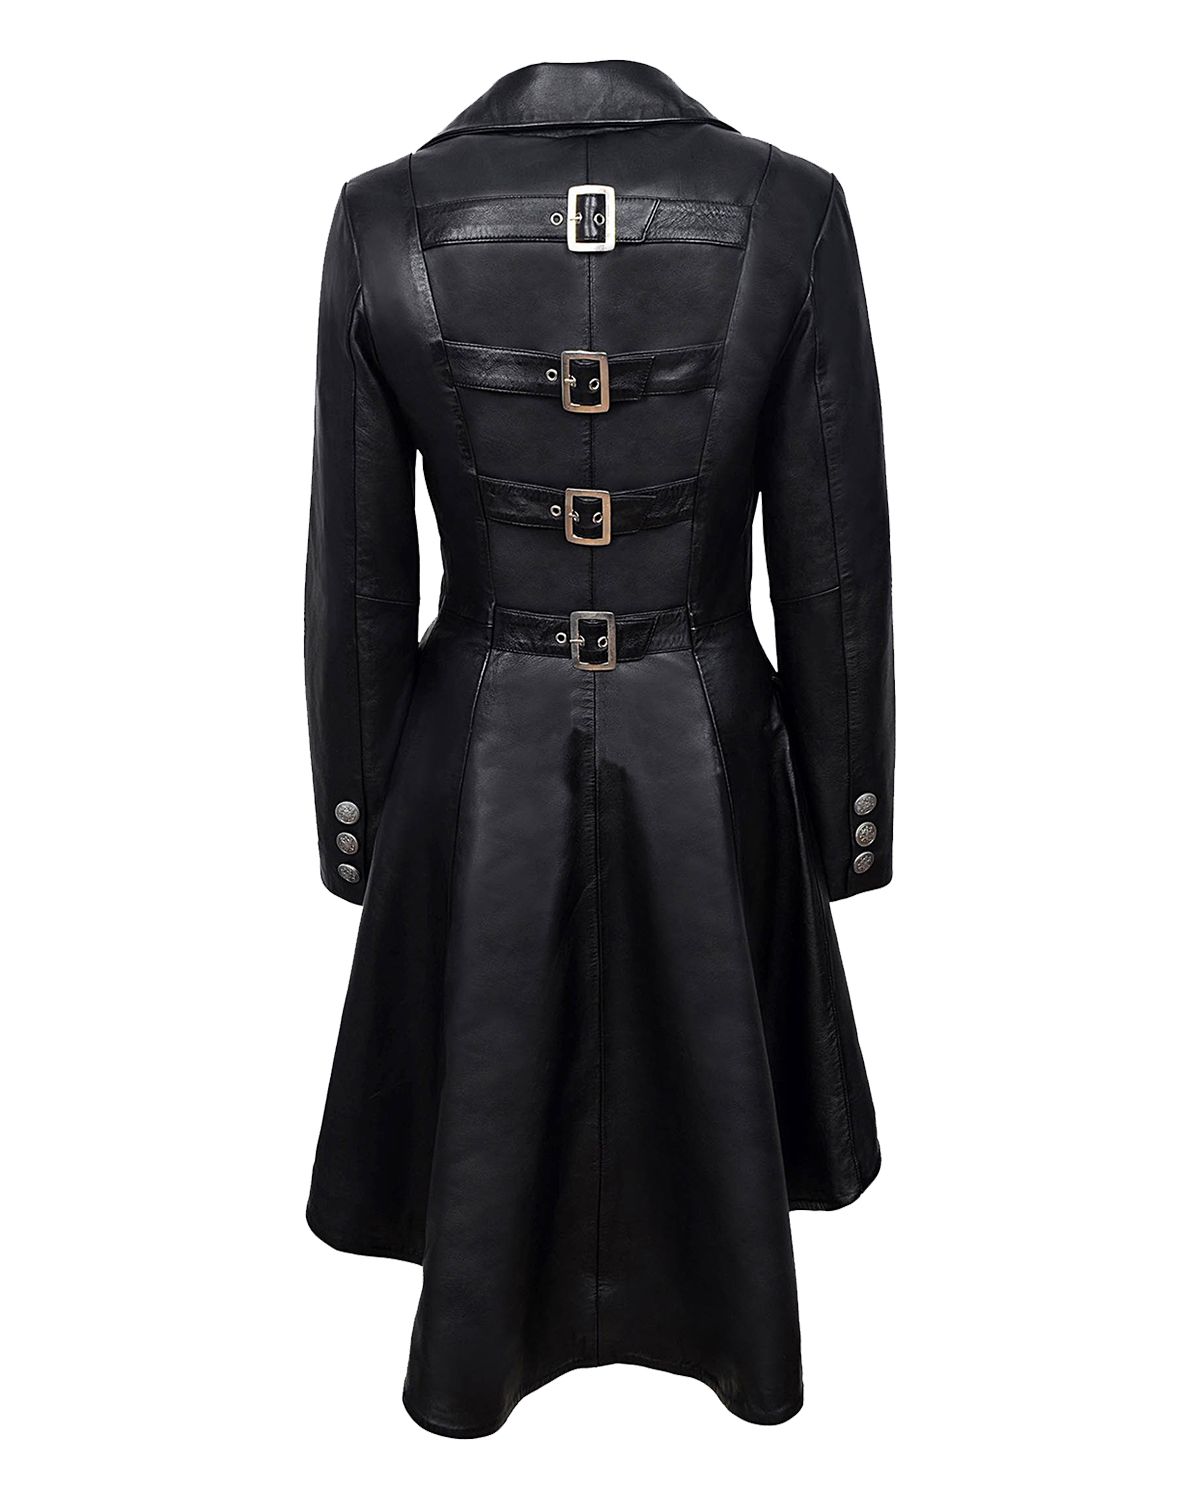 Elite Women's Back Buckle Real Leather Long Gothic Coat